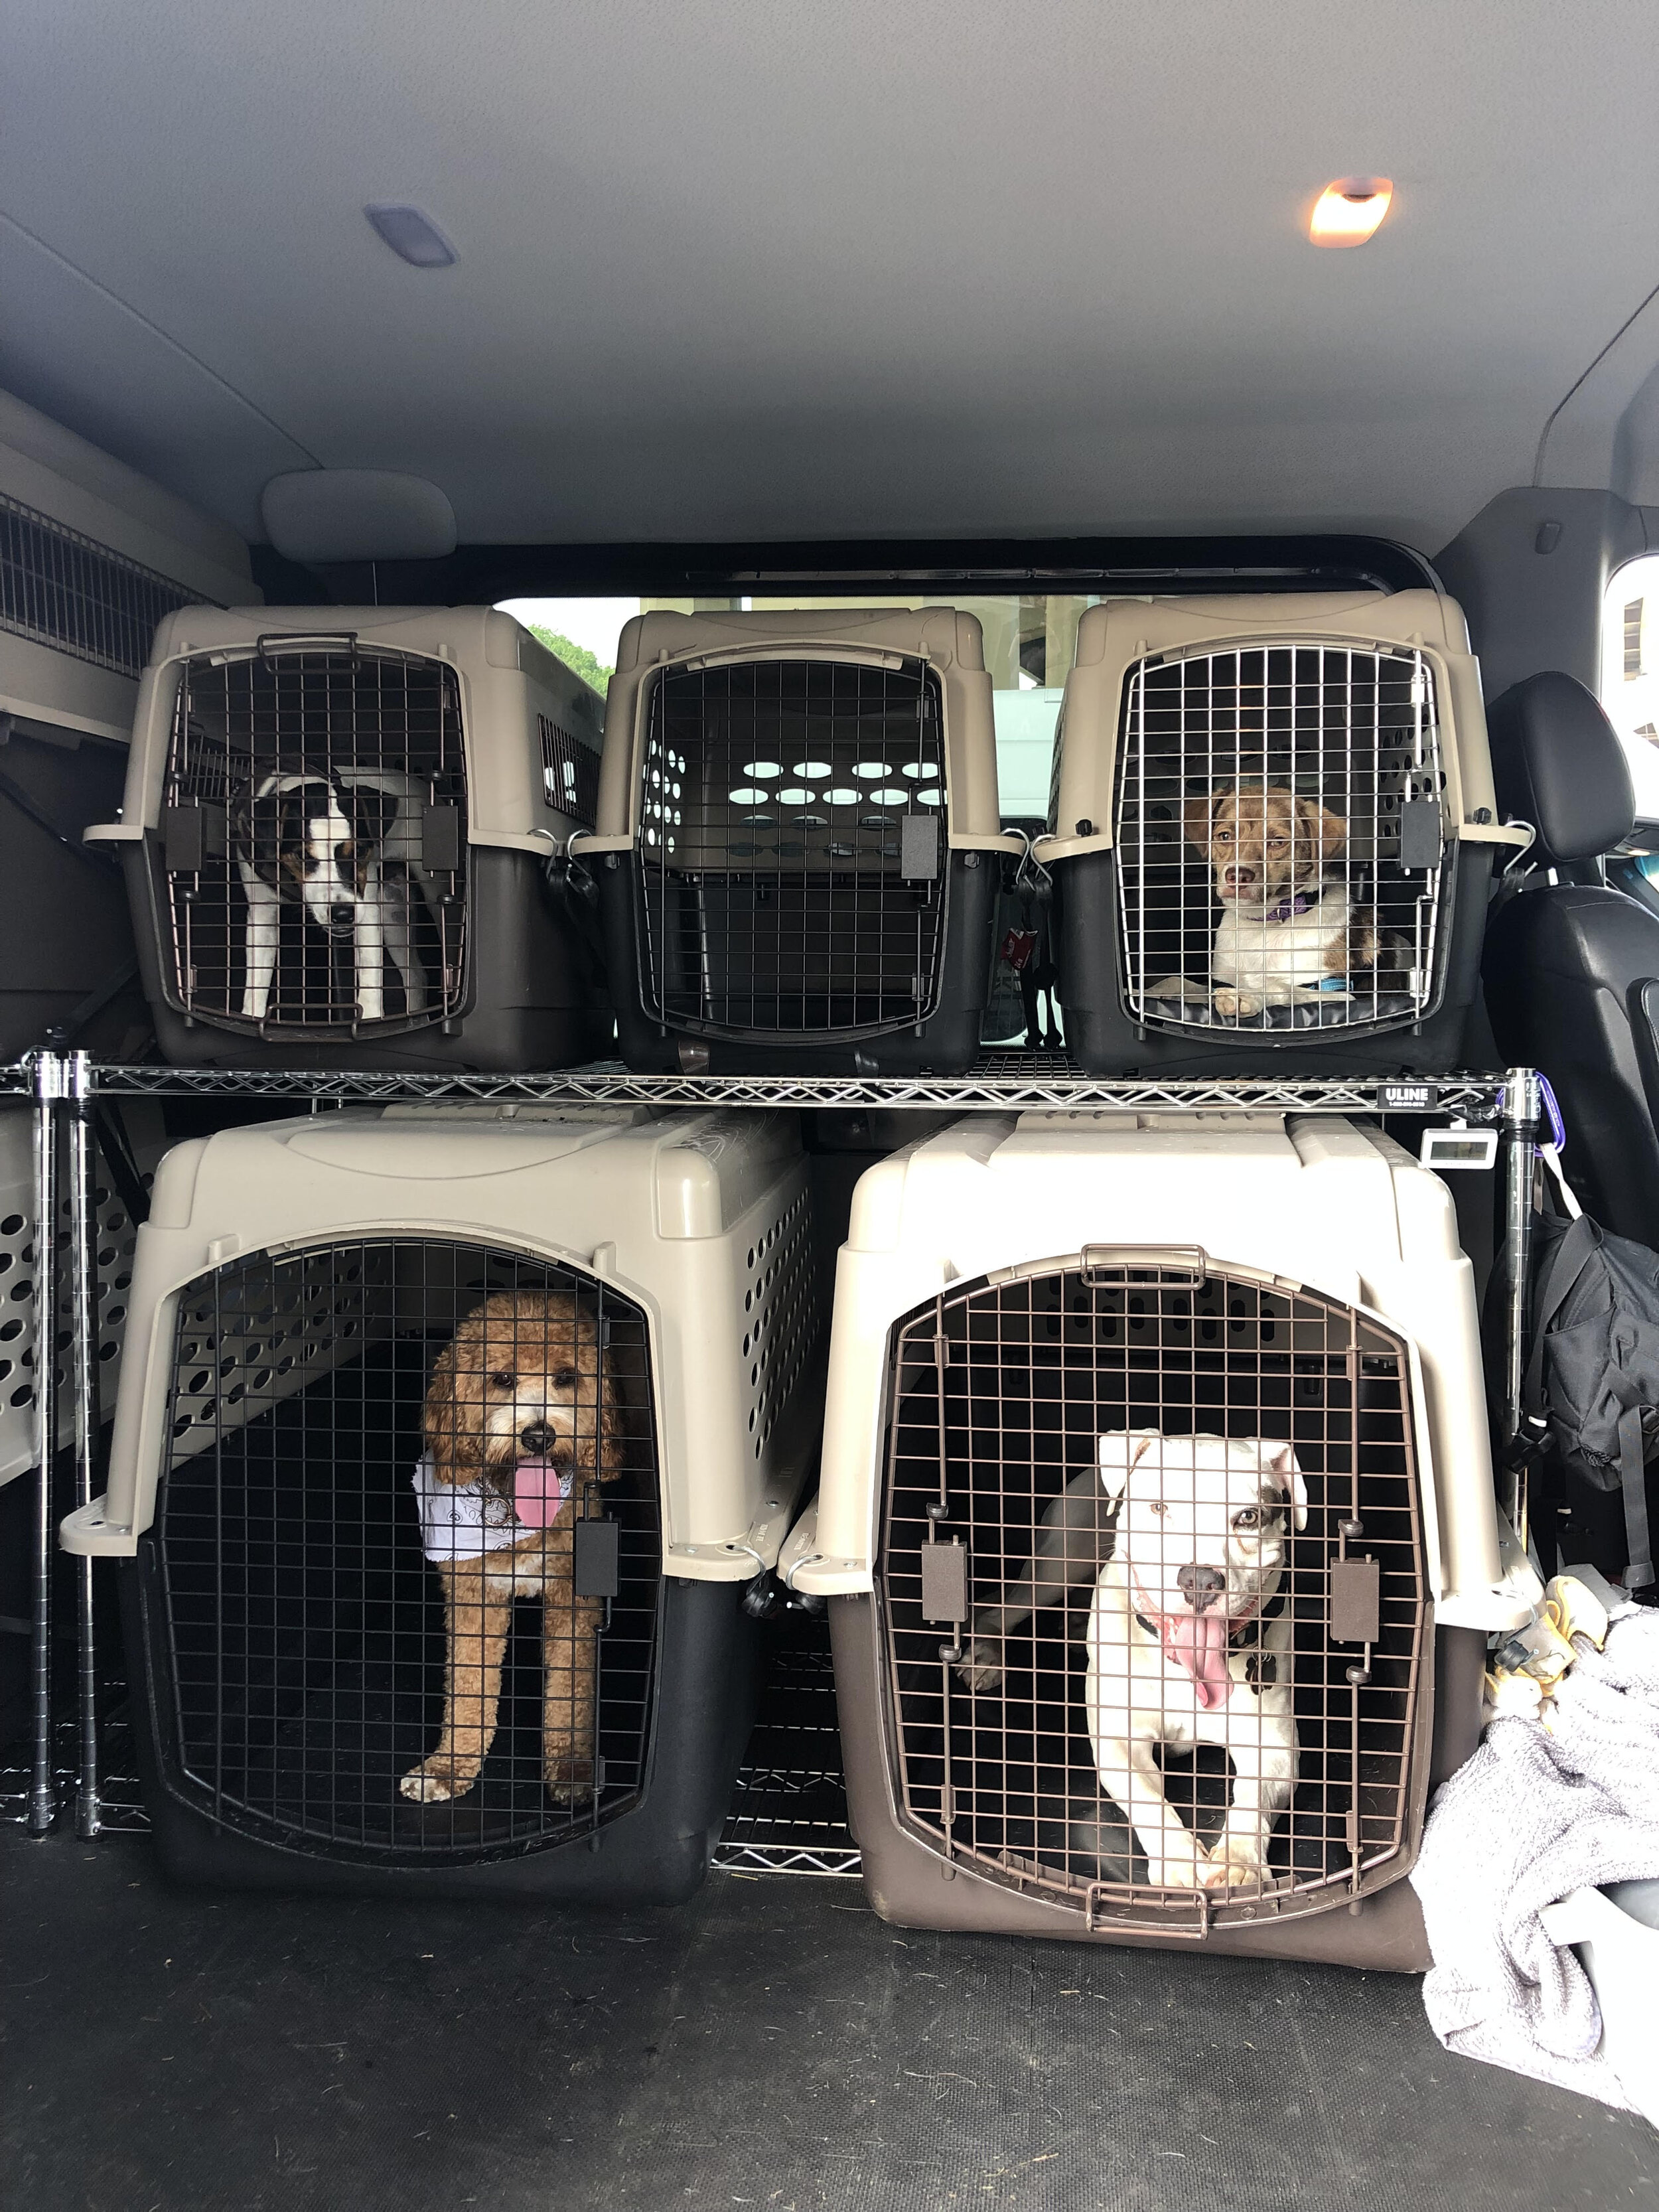 dogs in crates.jpg